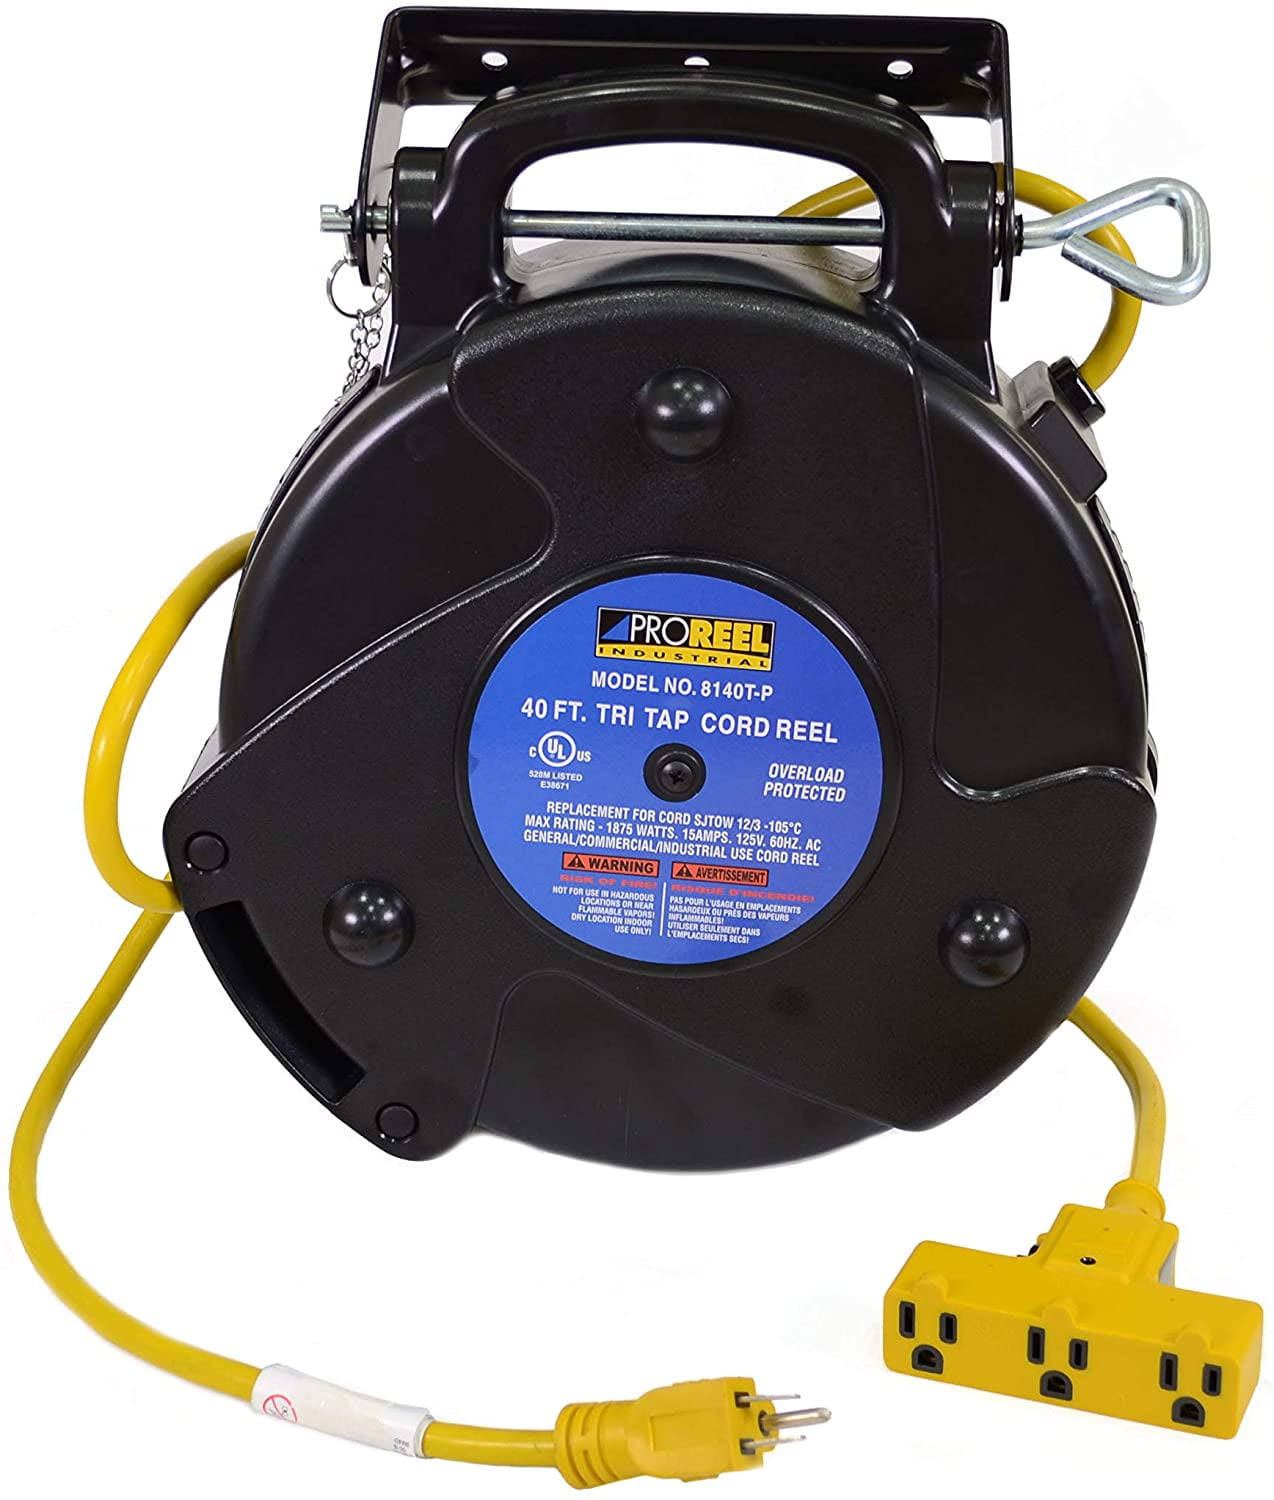 Industrial Retractable Extension Cord Reel Tri-Tap and Circuit Breaker  8140T-P 